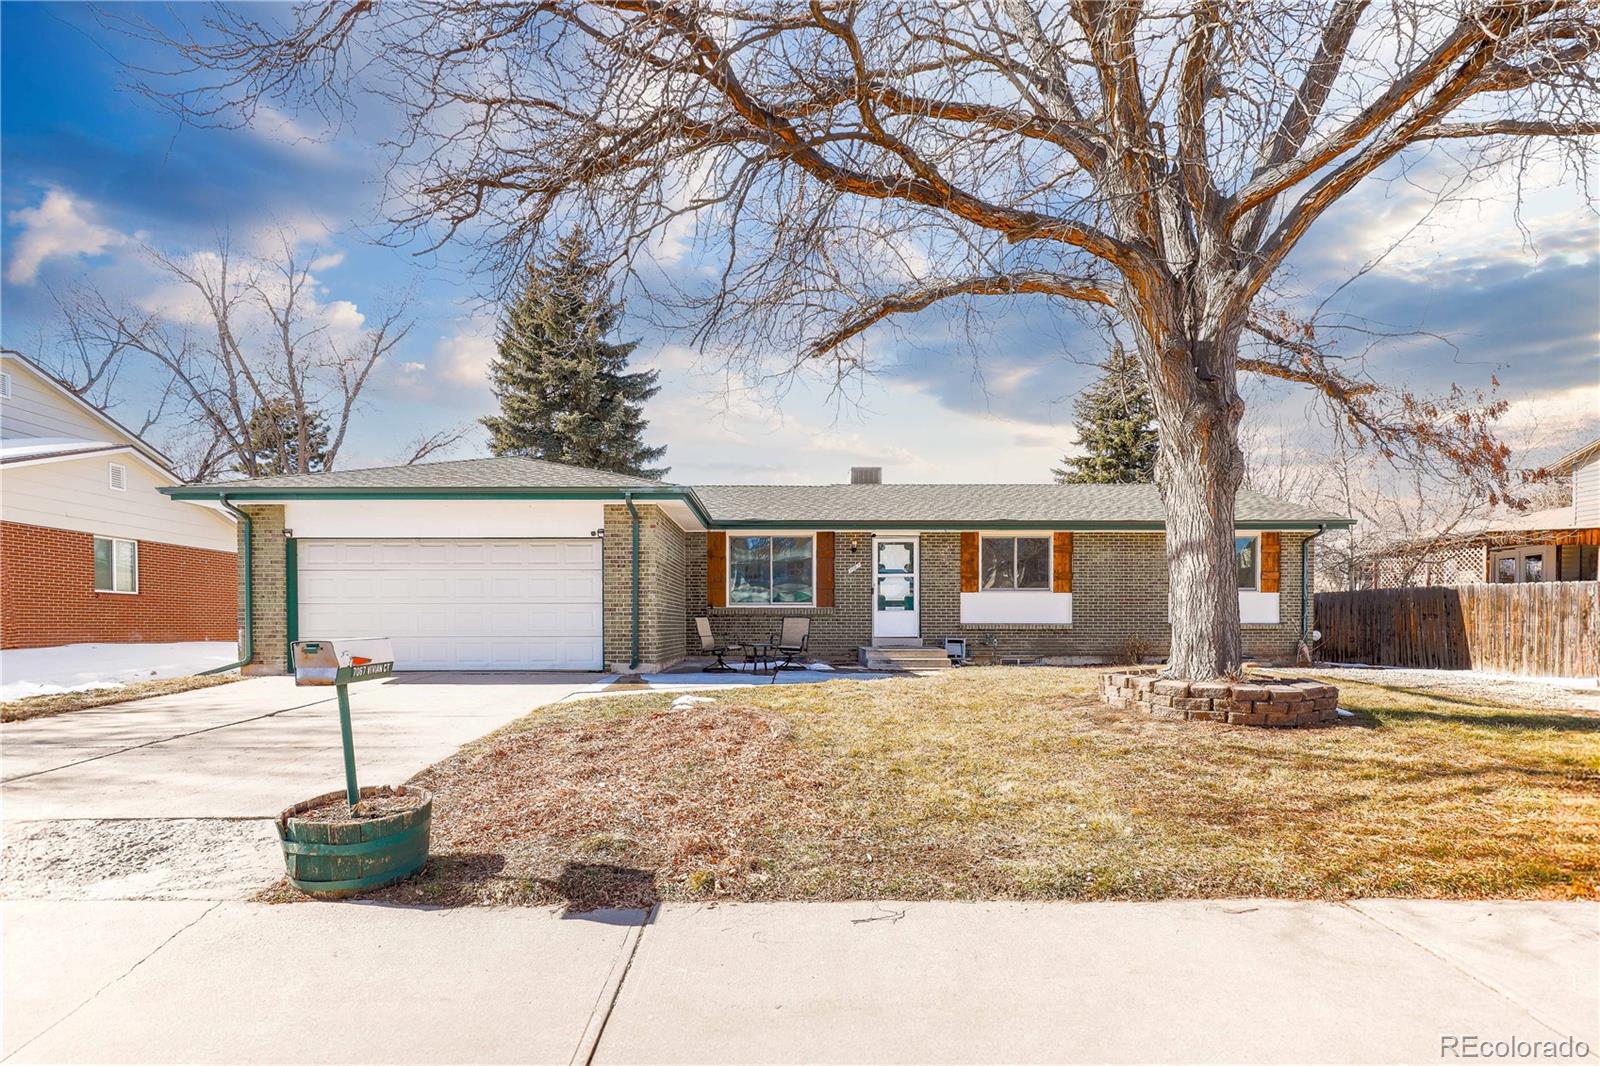 7067  vivian court, Arvada sold home. Closed on 2024-04-29 for $650,647.